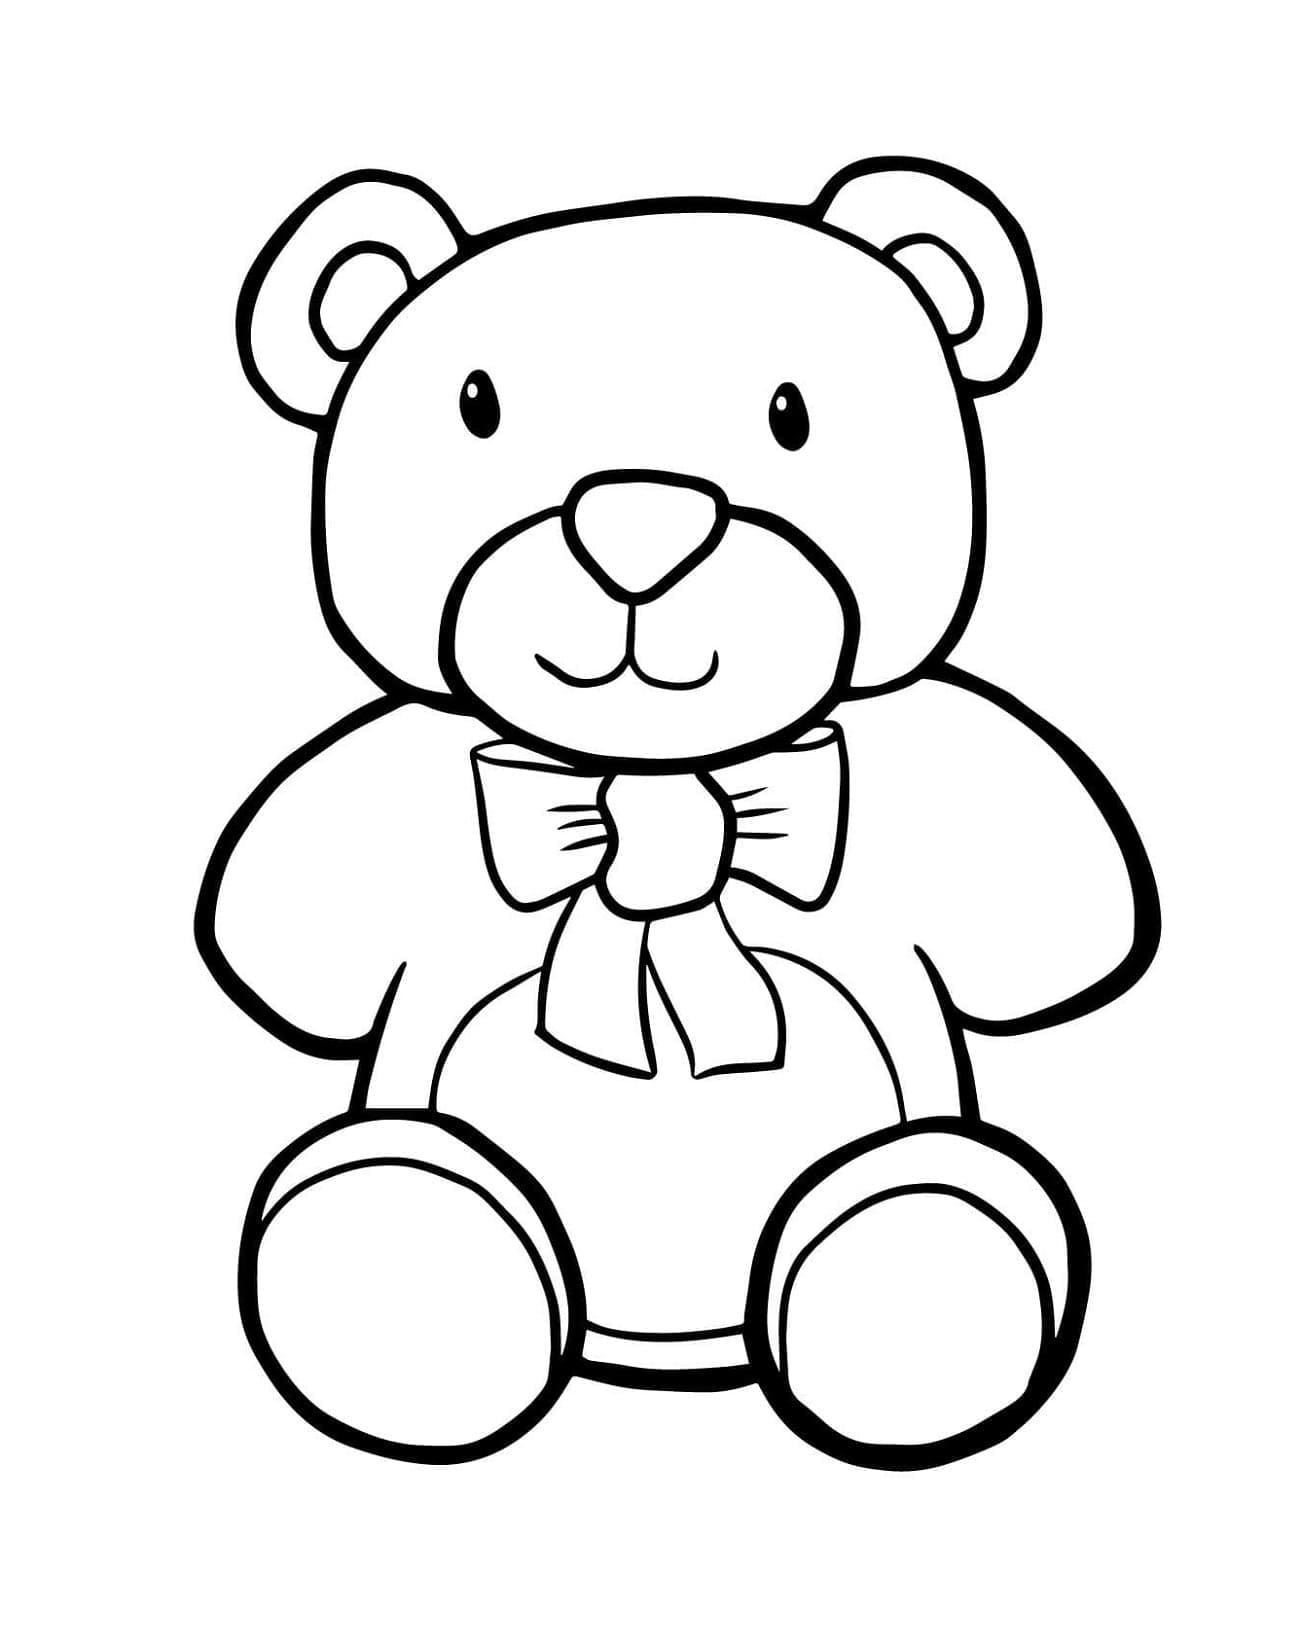 Printable Great Teddy Bear Coloring Page